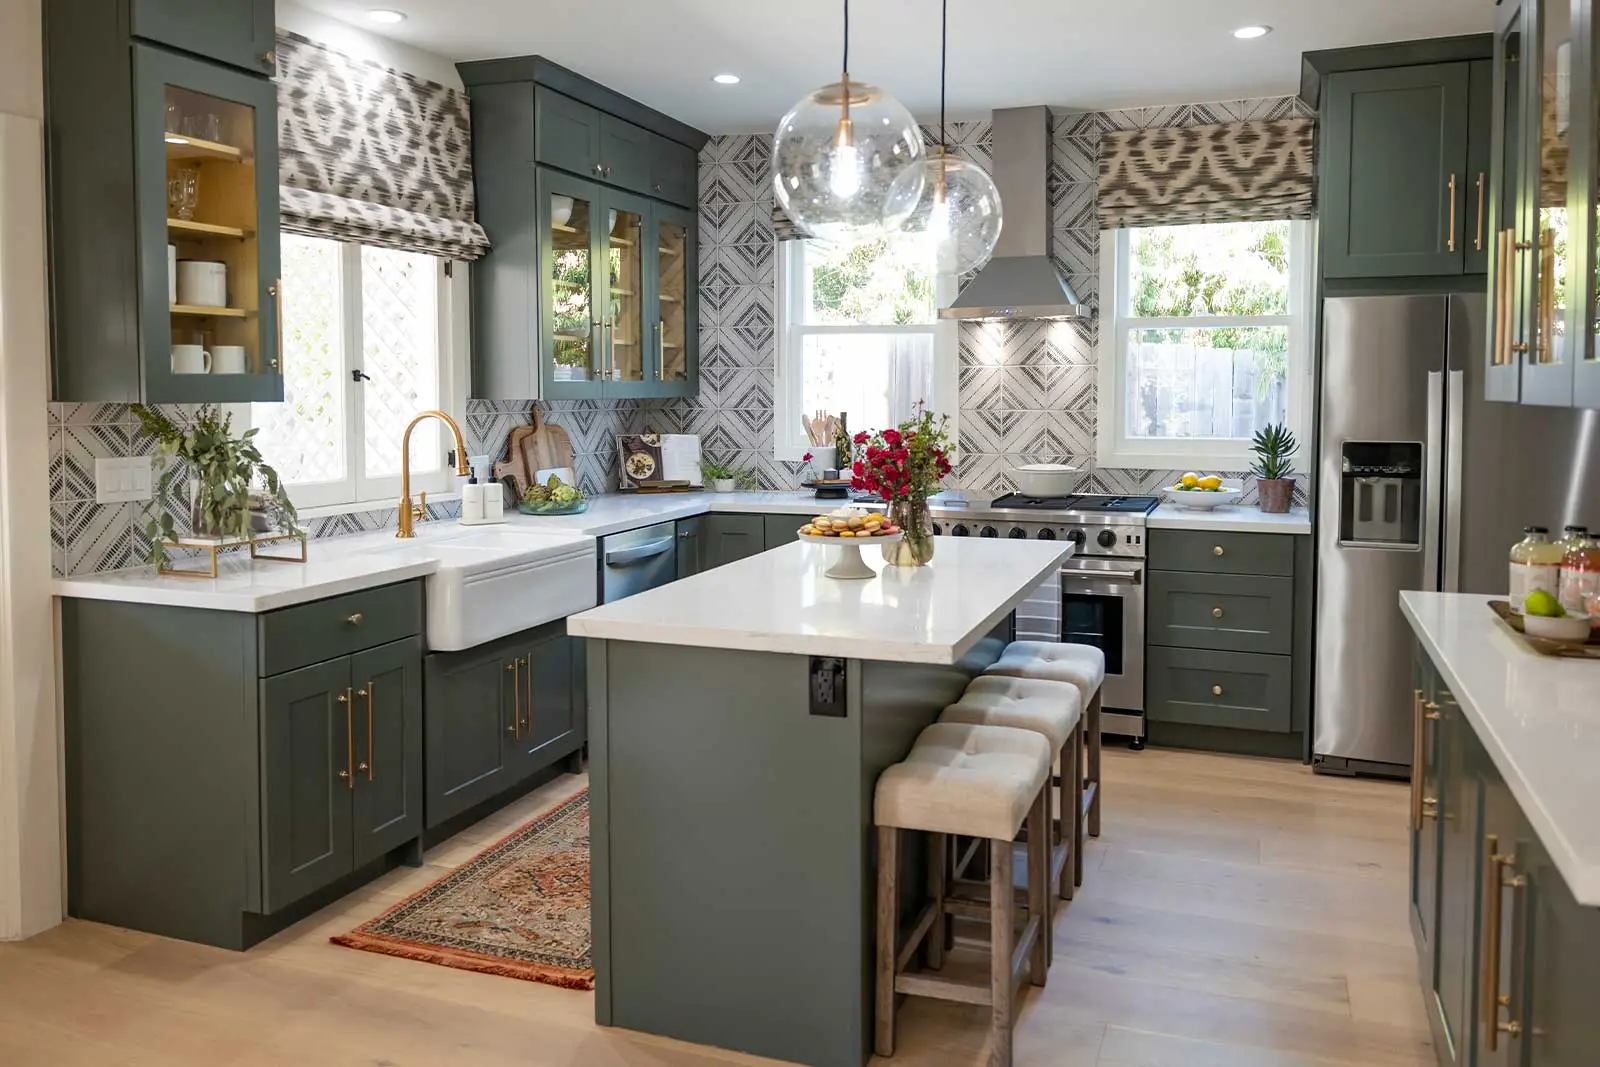 property brothers season 7 jasmin and nick, property brothers forever home kitchen renovations